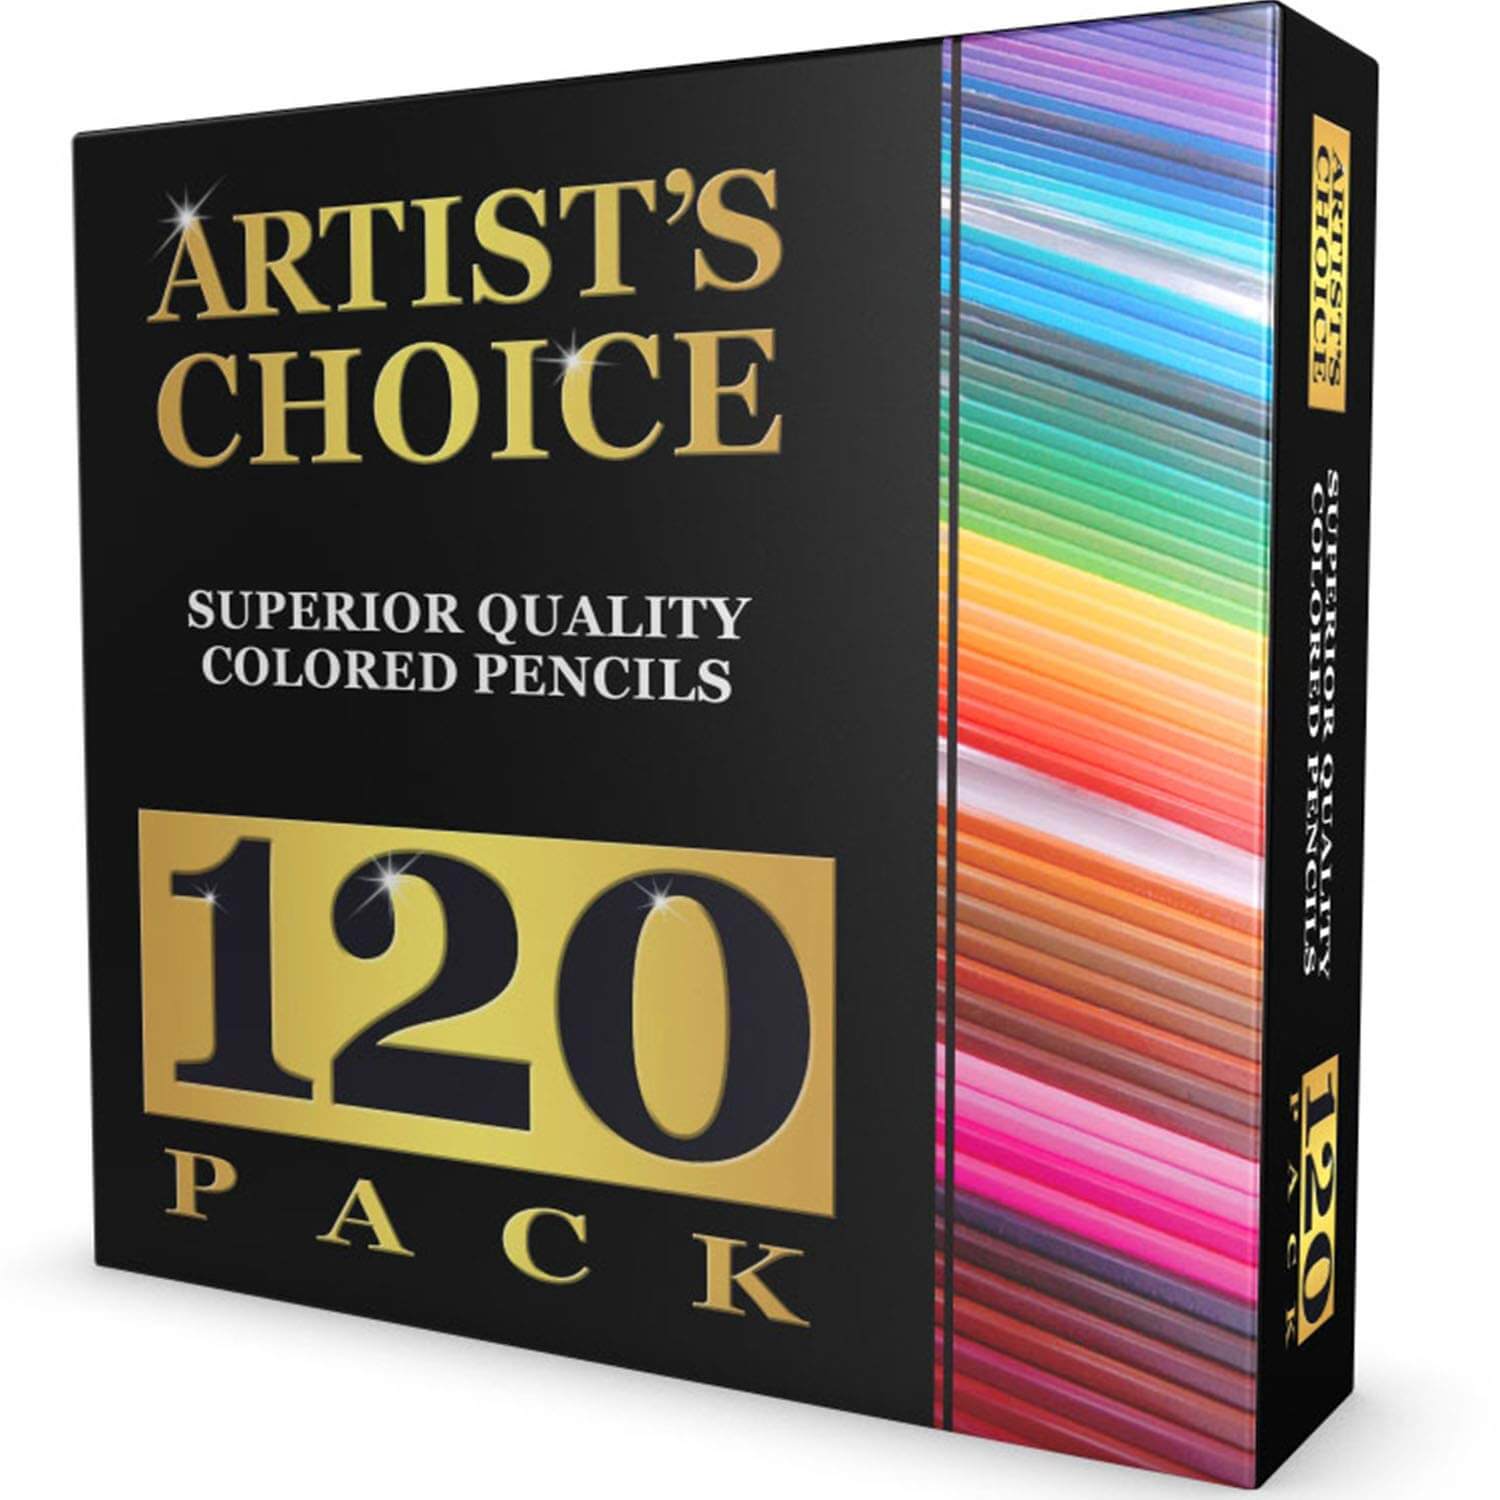 Artist's Choice 120-Pack Colored Pencils - - Best Supplies For Adult Coloring Blog